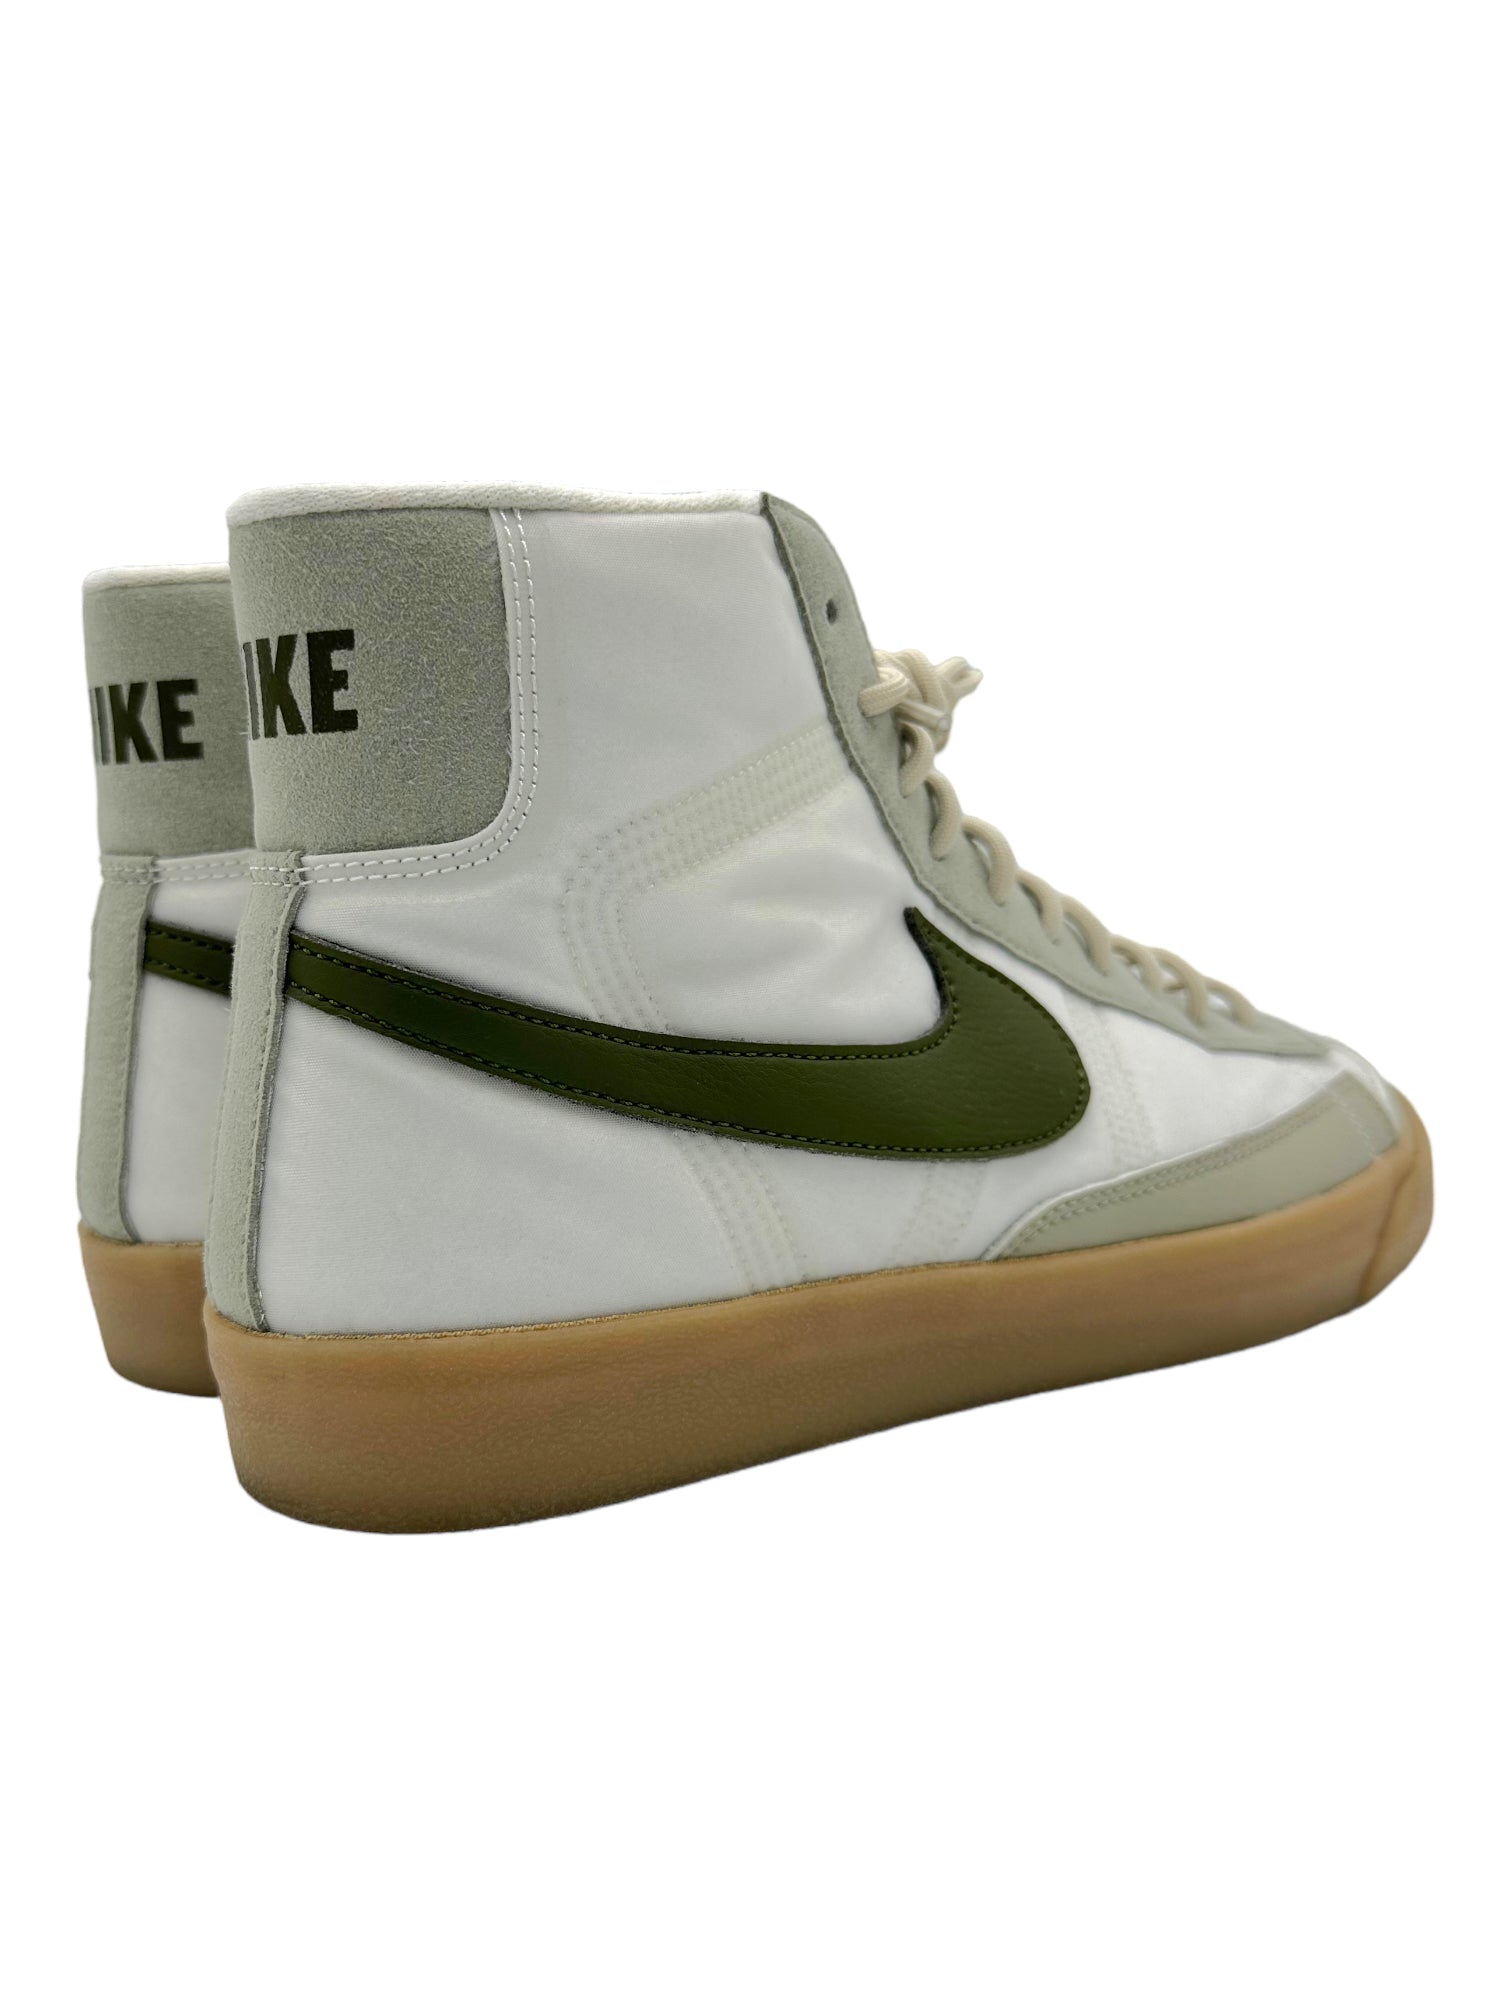 Nike Blazer Mid 77 Green Nylon Sneakers - Genuine Design Luxury Consignment for Men. New & Pre-Owned Clothing, Shoes, & Accessories. Calgary, Canada